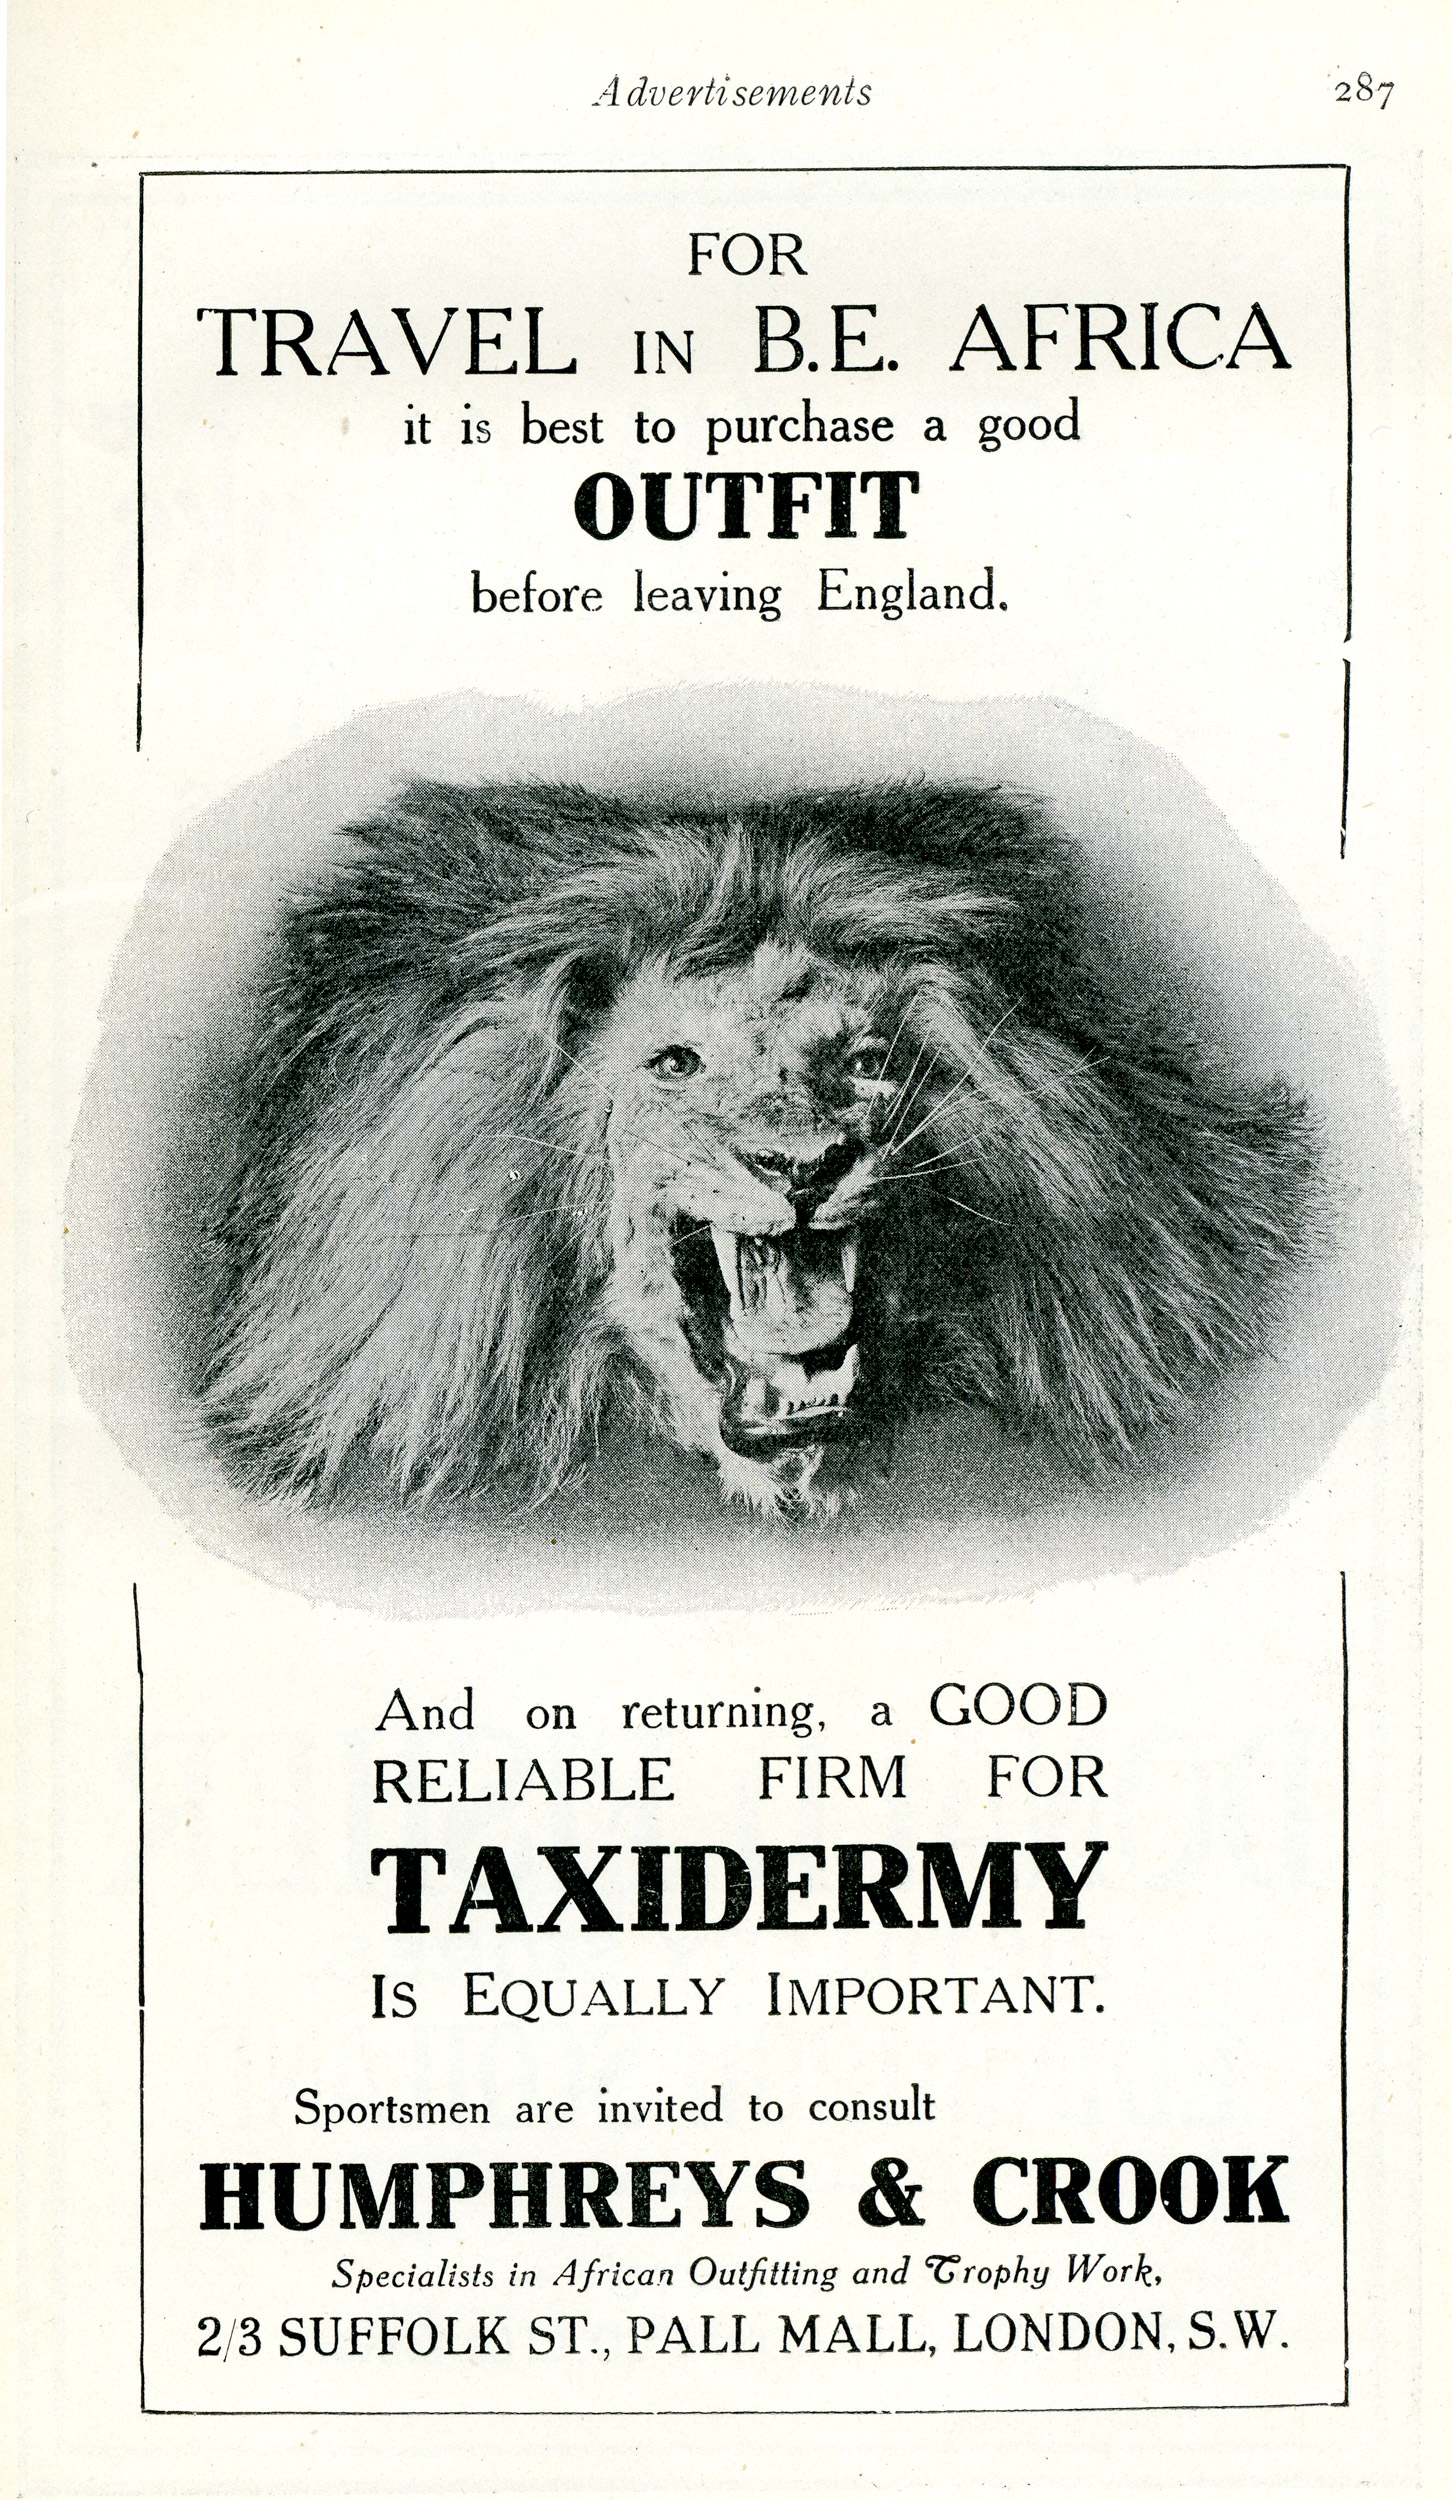 Ad for taxidermy service showing the head of a lion